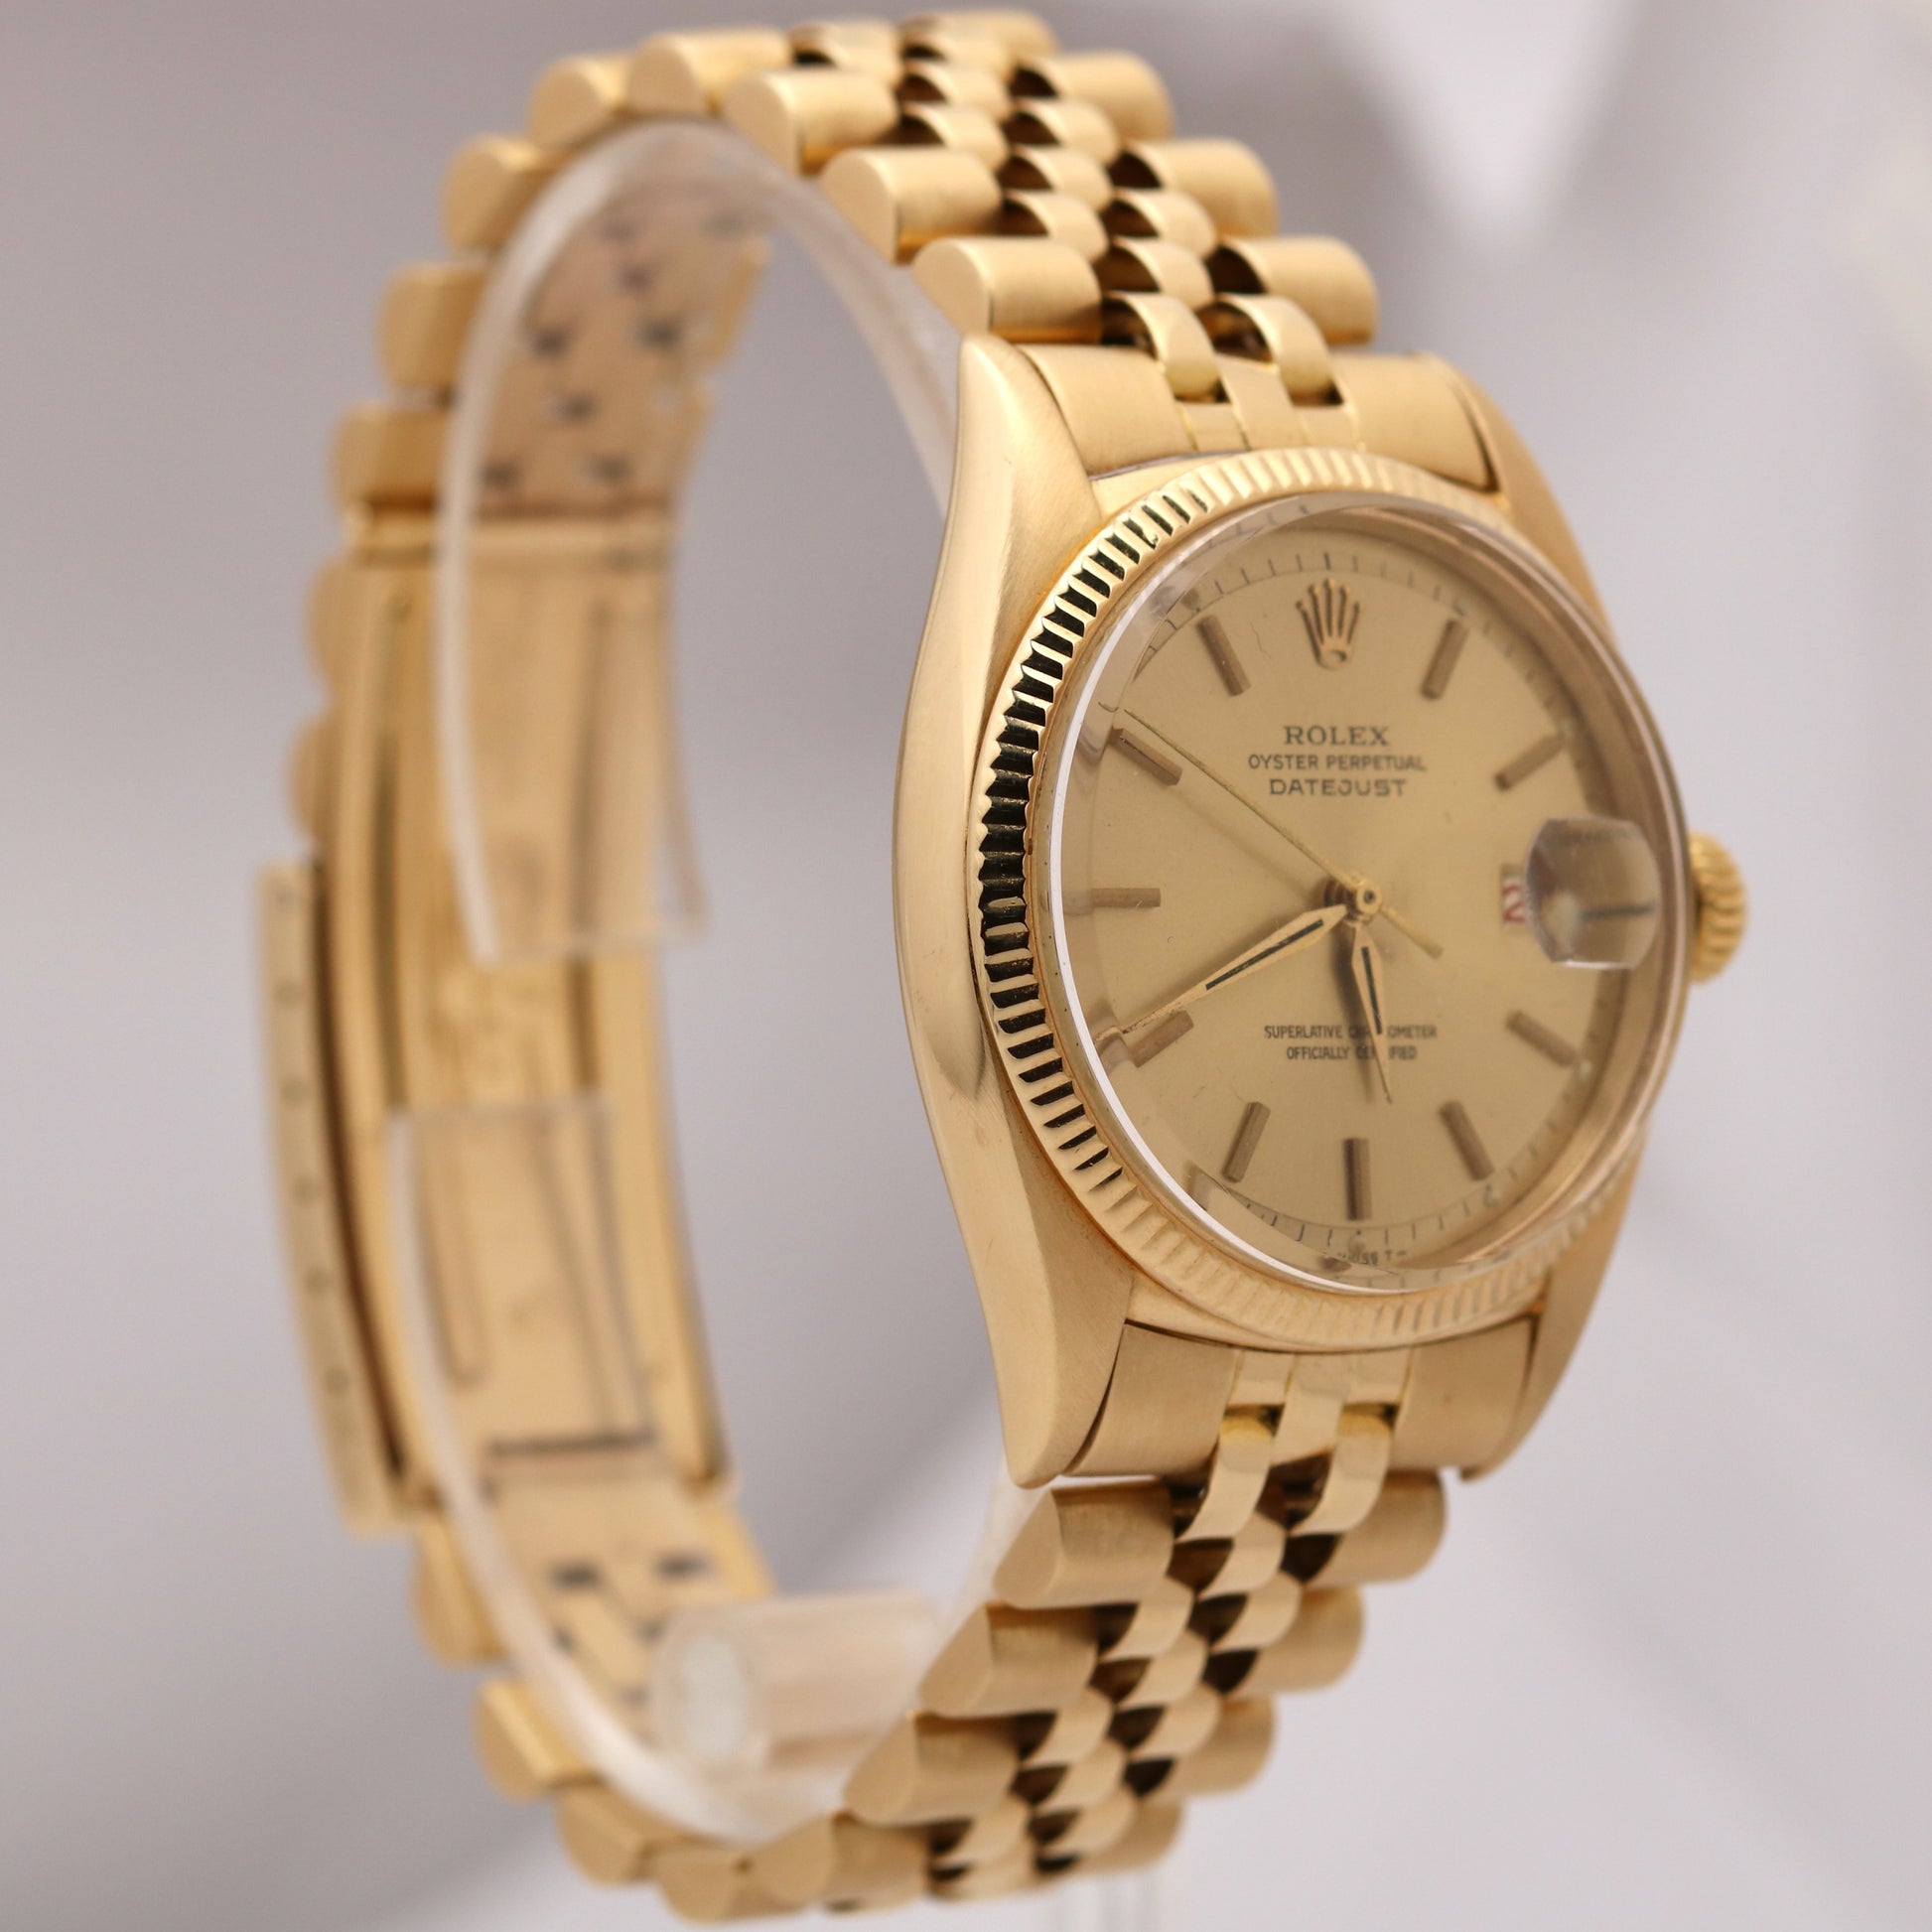 Rolex Ref. 6309 18k Yellow Gold Thunderbird Oyster Perpetual Datejust,  circa 1950's